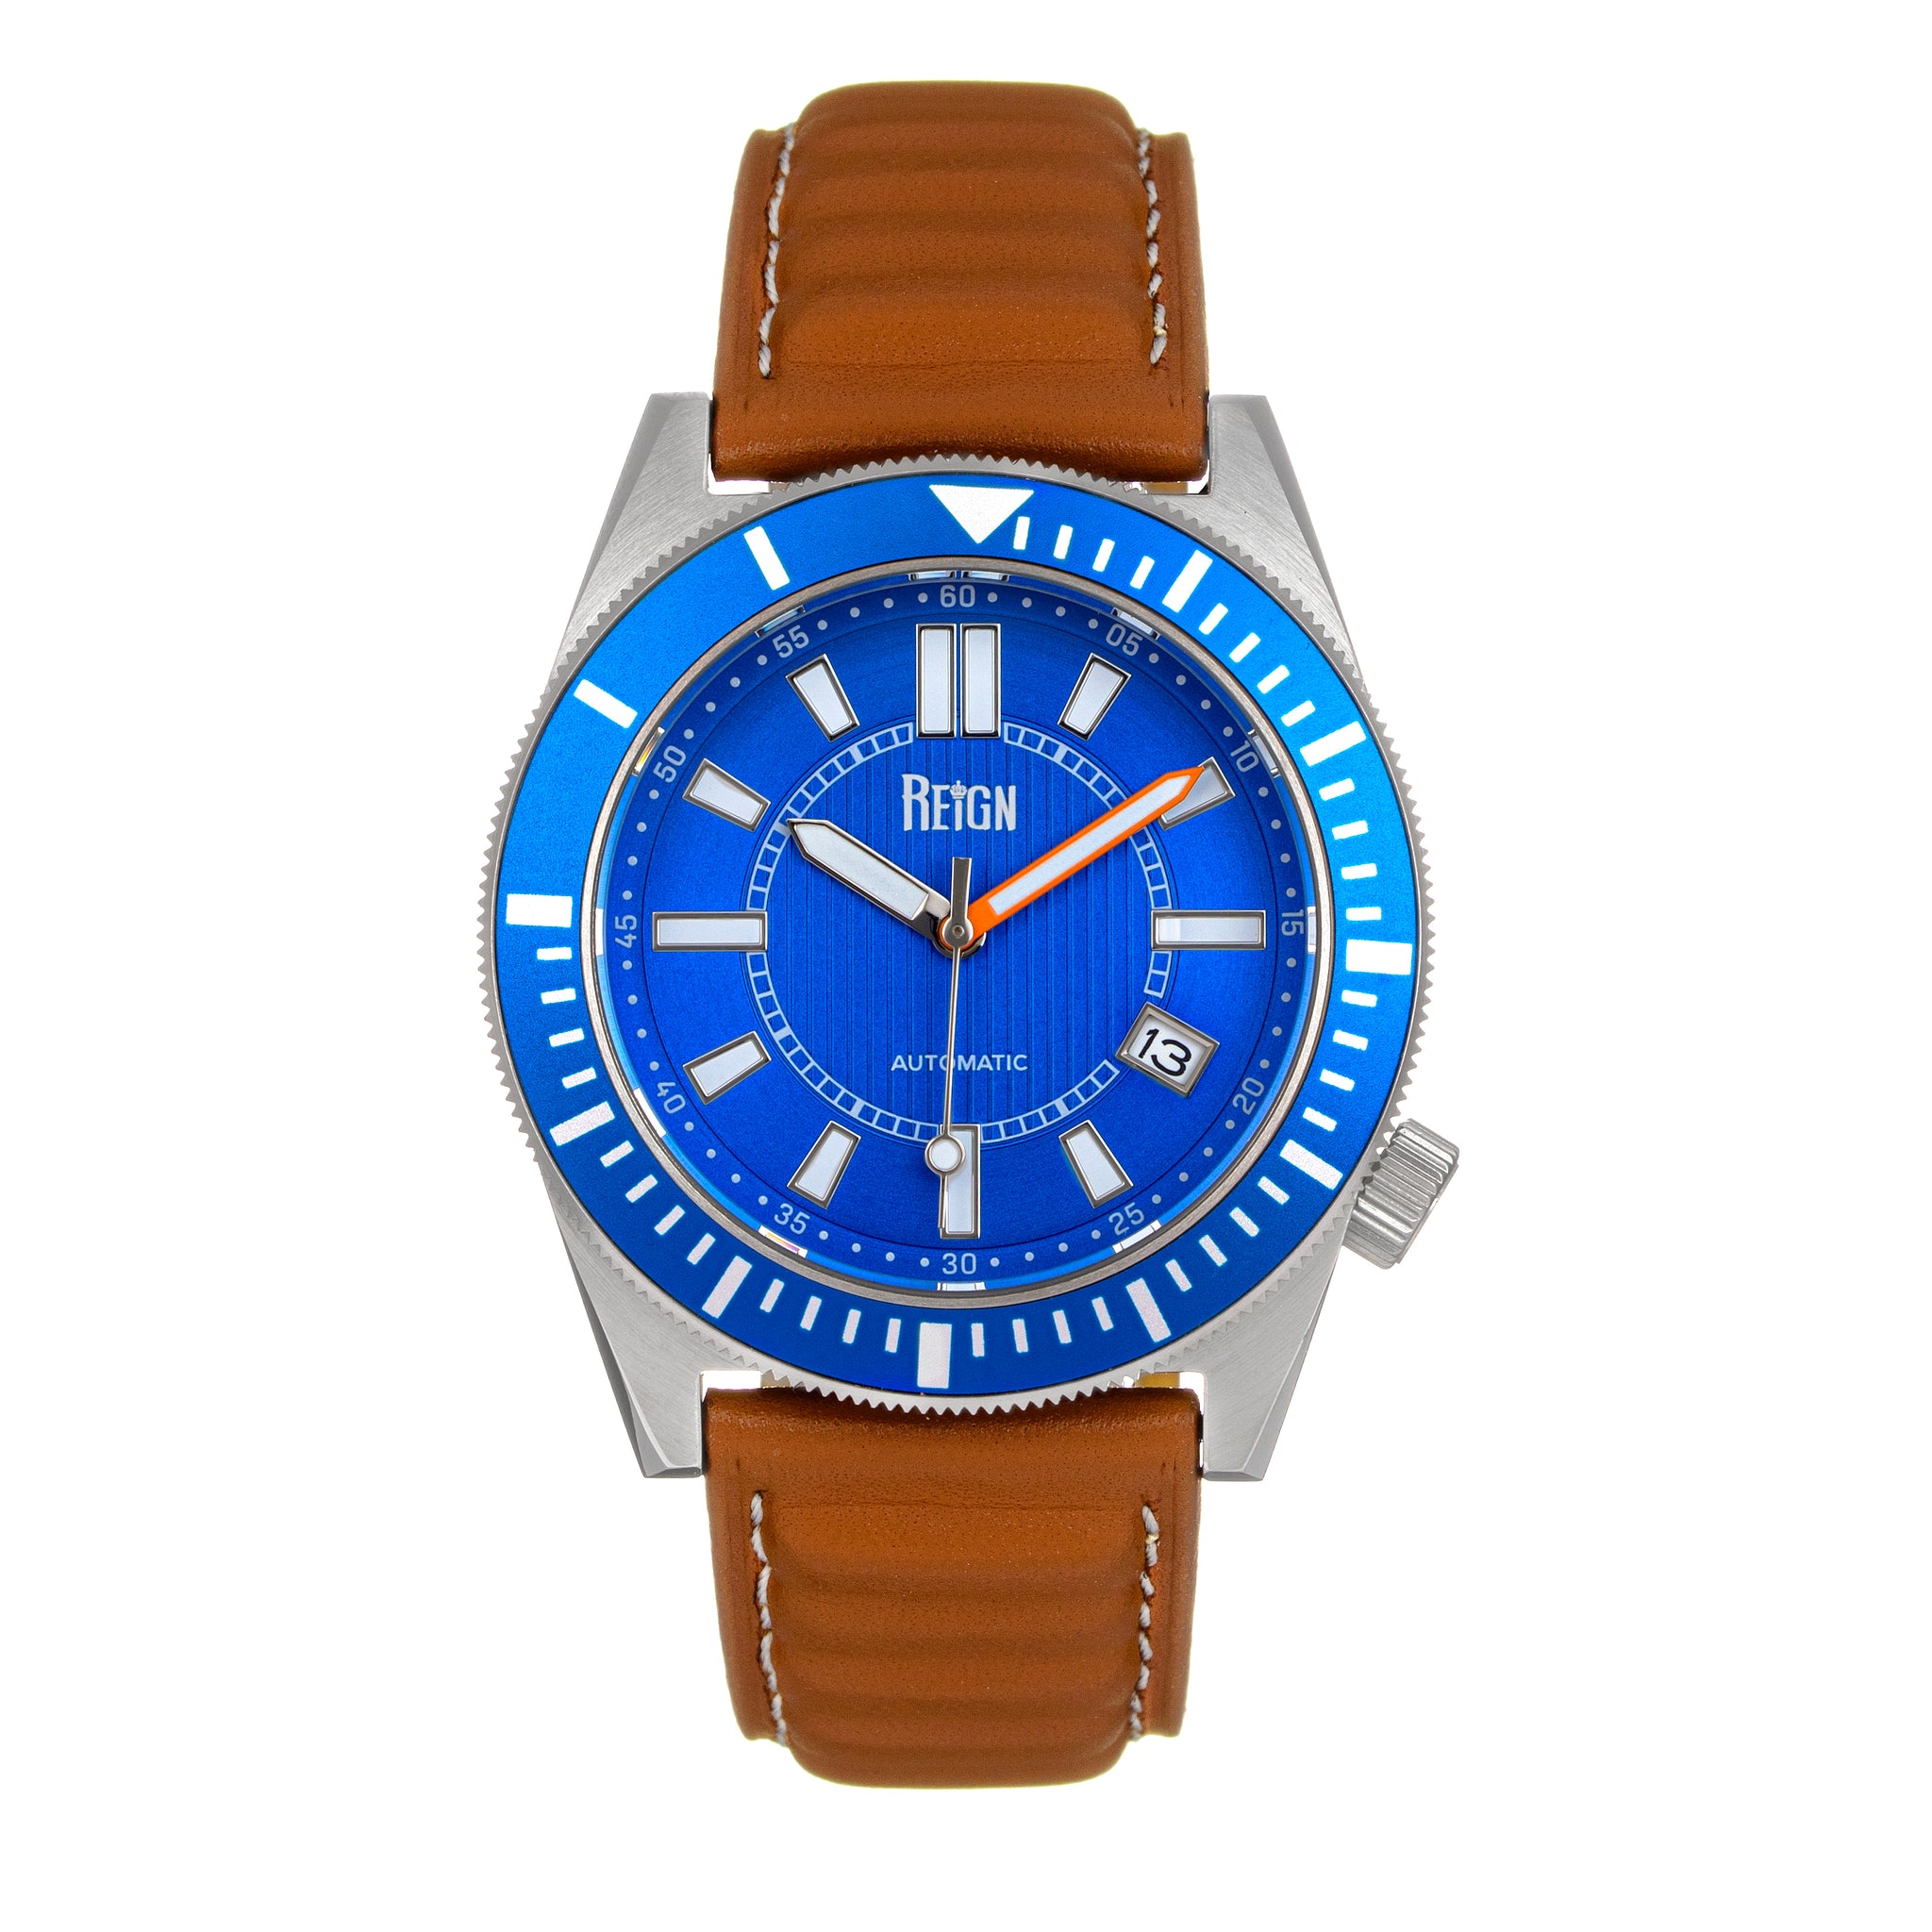 Reign Francis Leather-Band Watch w/Date- -Brown/Blue - REIRN6304